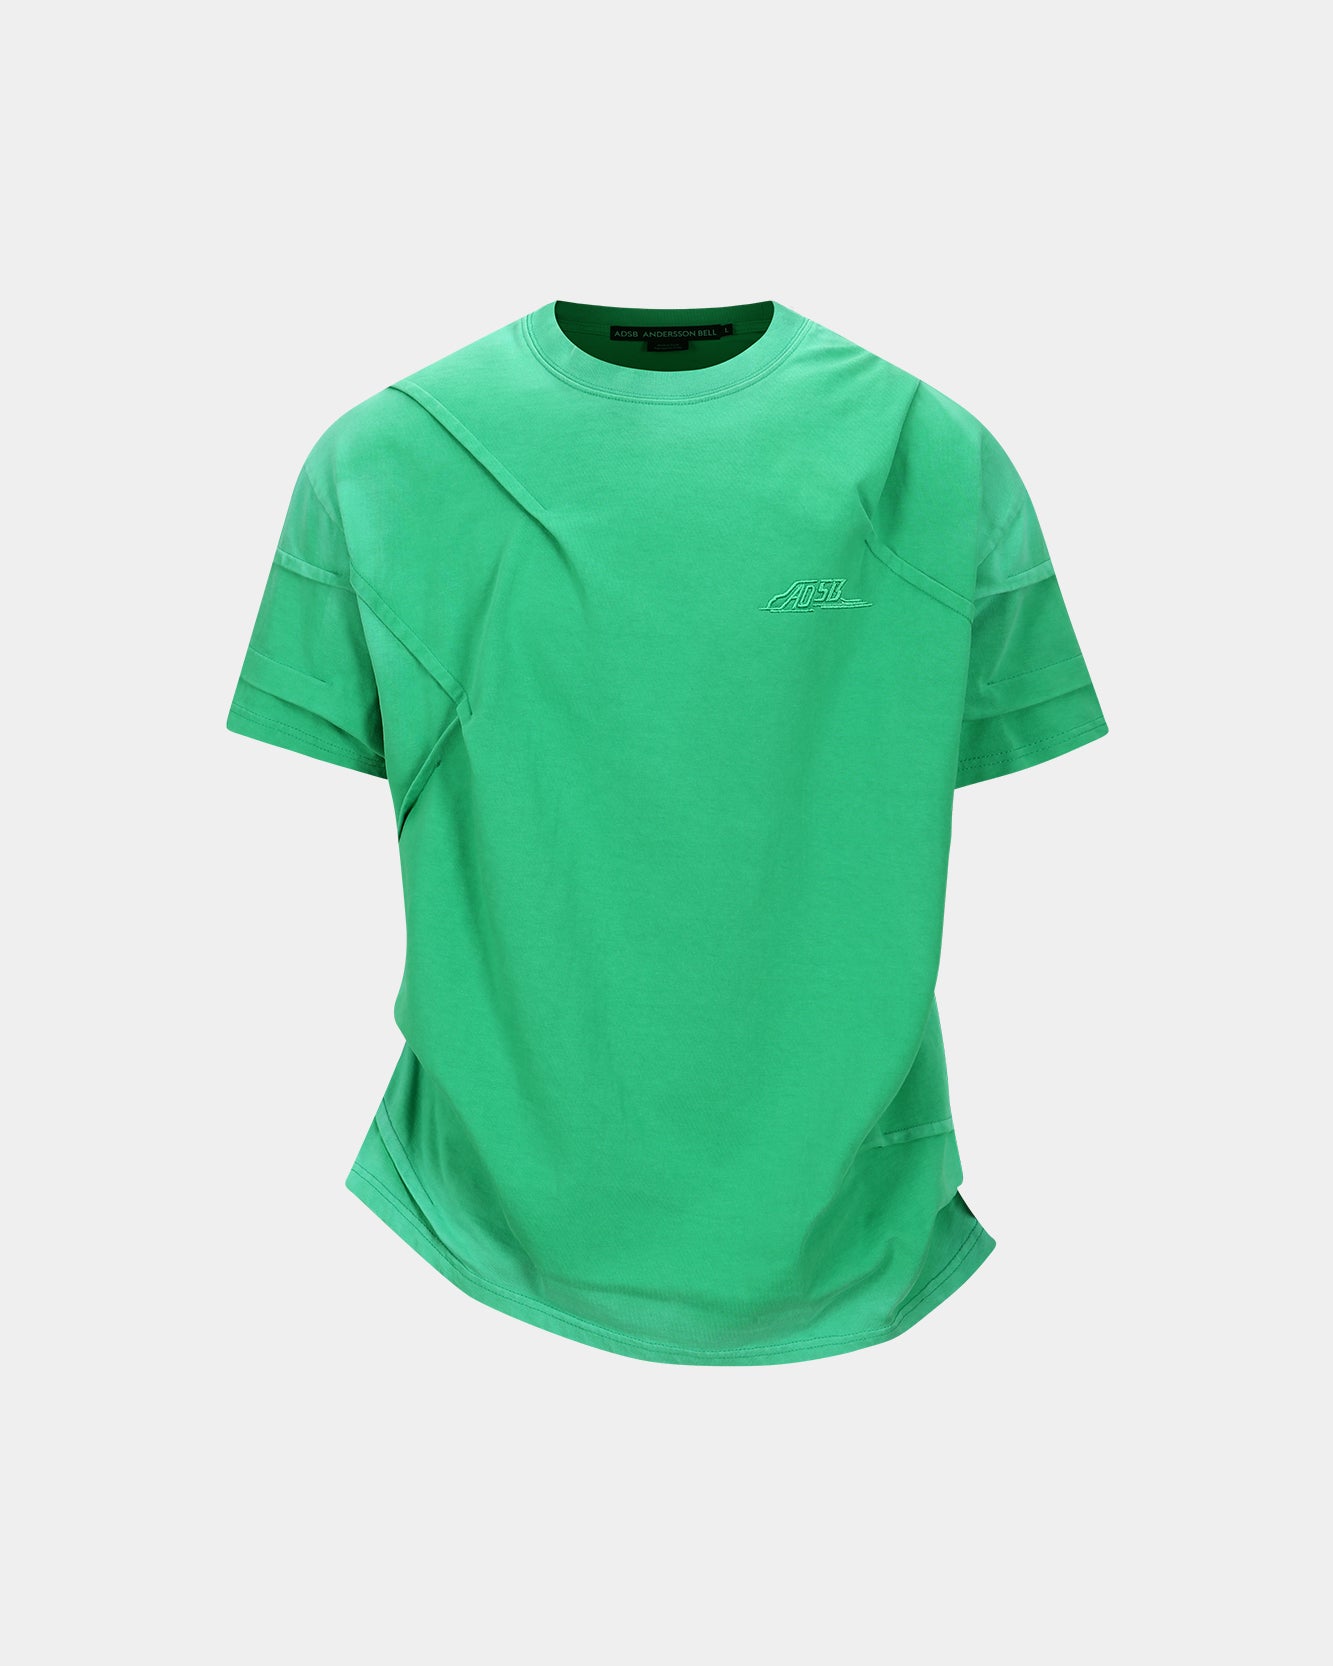 Andersson Bell MARDRO GRADIENT T-SHIRTS atb1079m(GREEN)